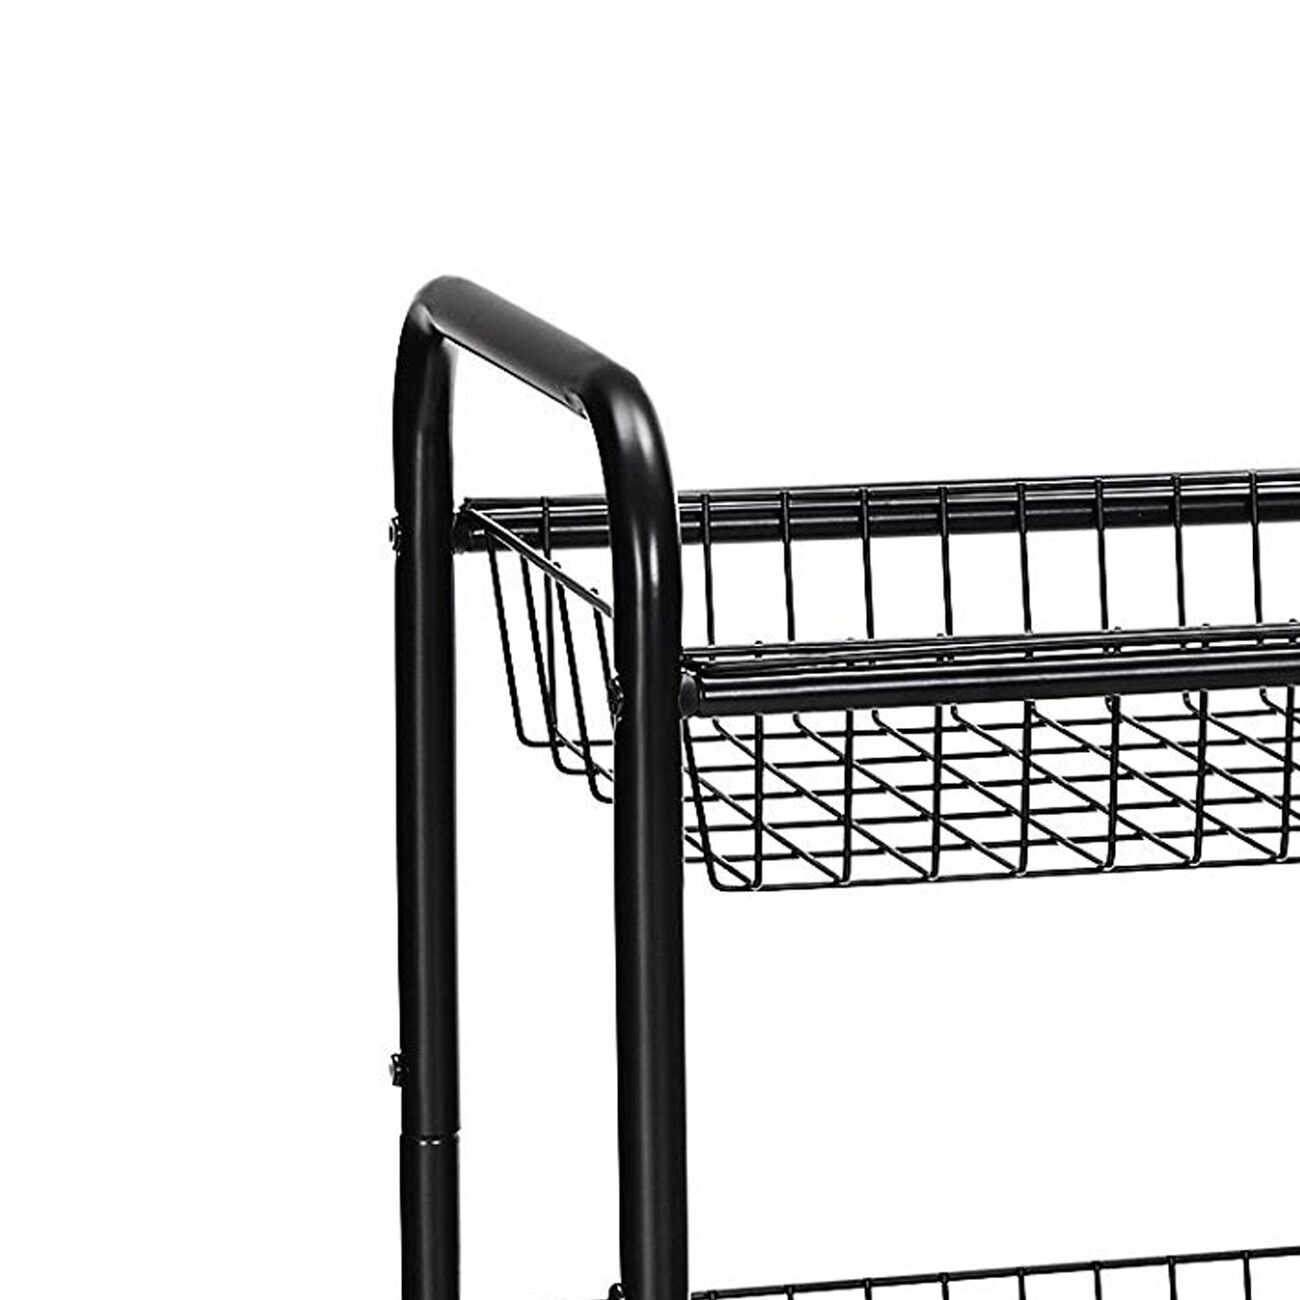 3 Tier Metal Frame Kitchen Cart with Casters and Grid Details, Black